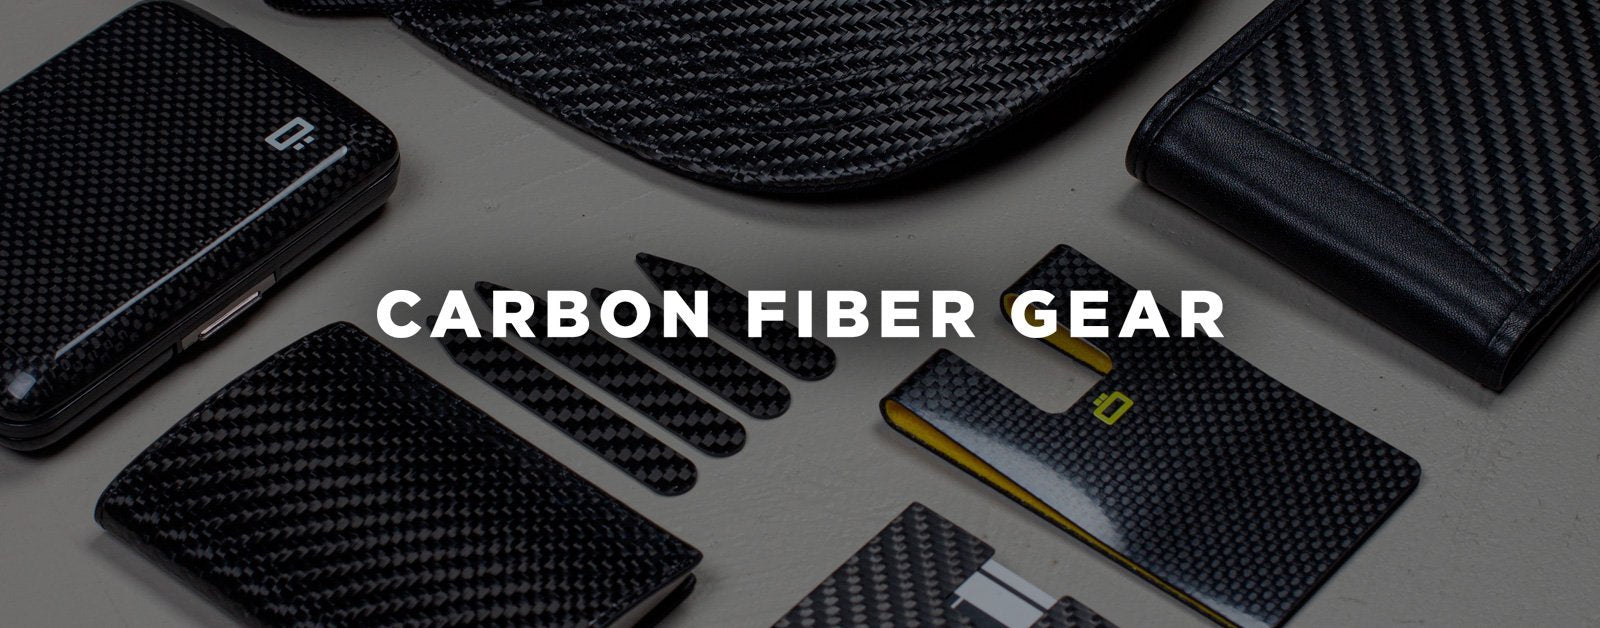 Exploring the Advantages of Carbon Fiber: Lightweight Strength with Black Fabric Weave and Transparent Resin